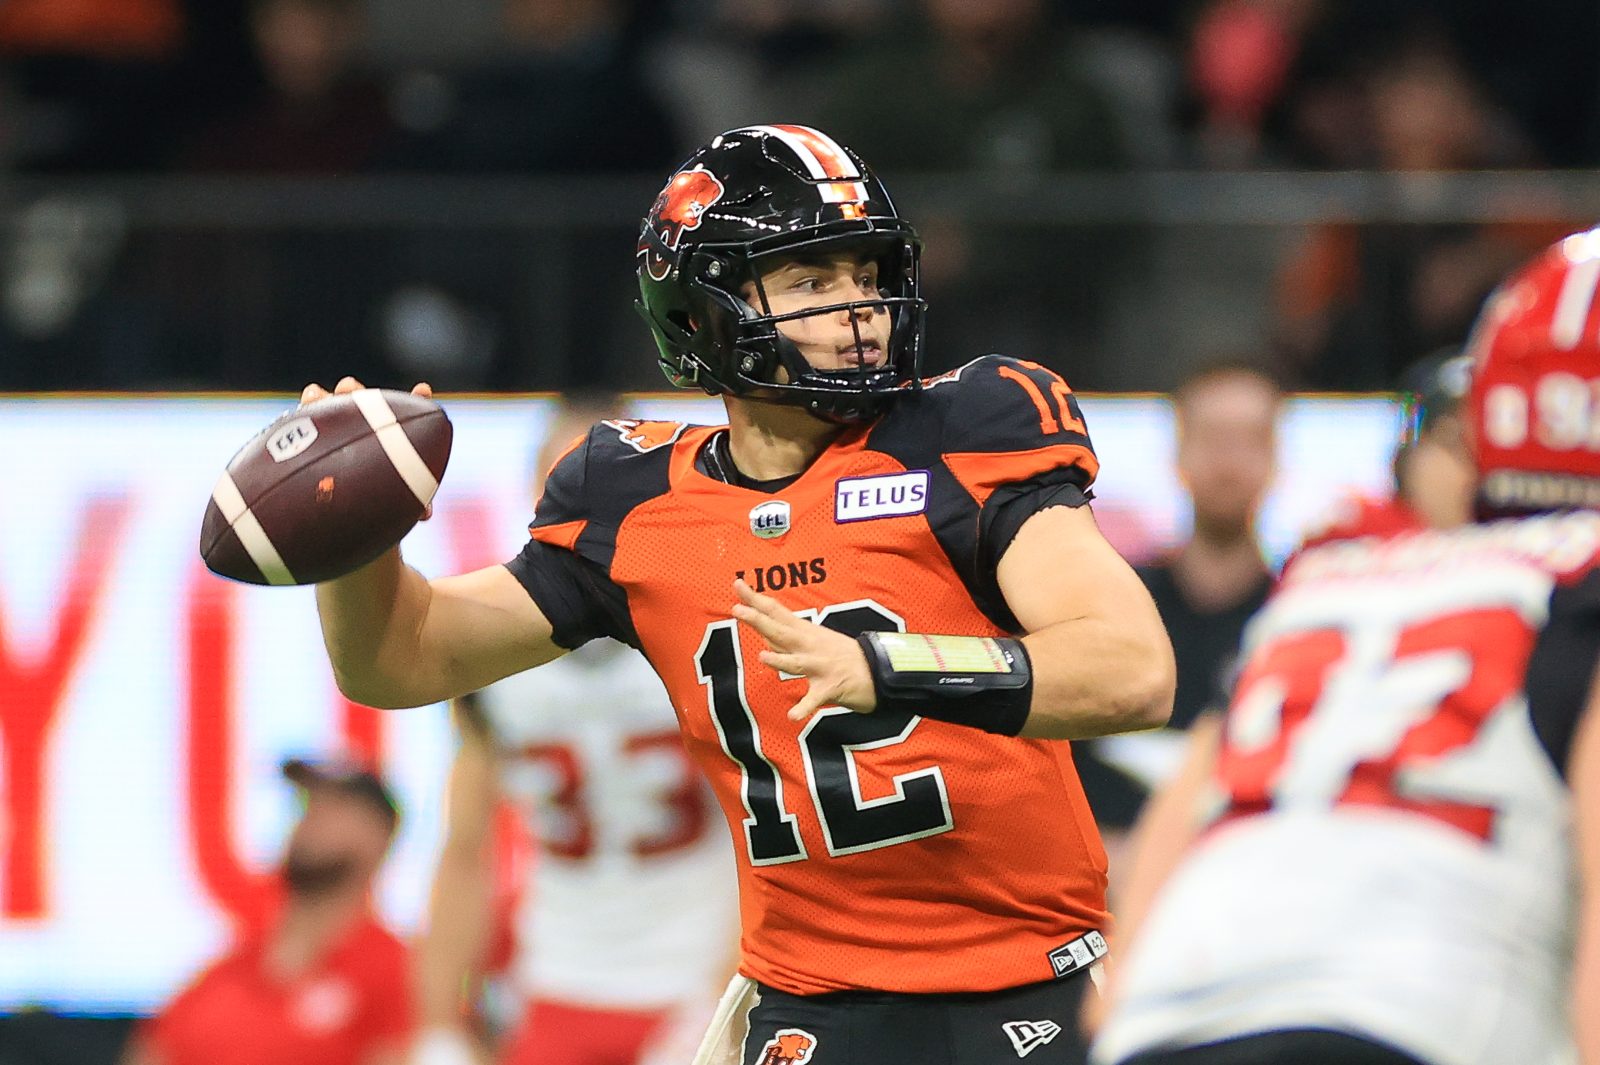 Holy Trinity Grad Nathan Rourke | After a season of learning the ins and outs of the Canadian Football League last season, Oakville